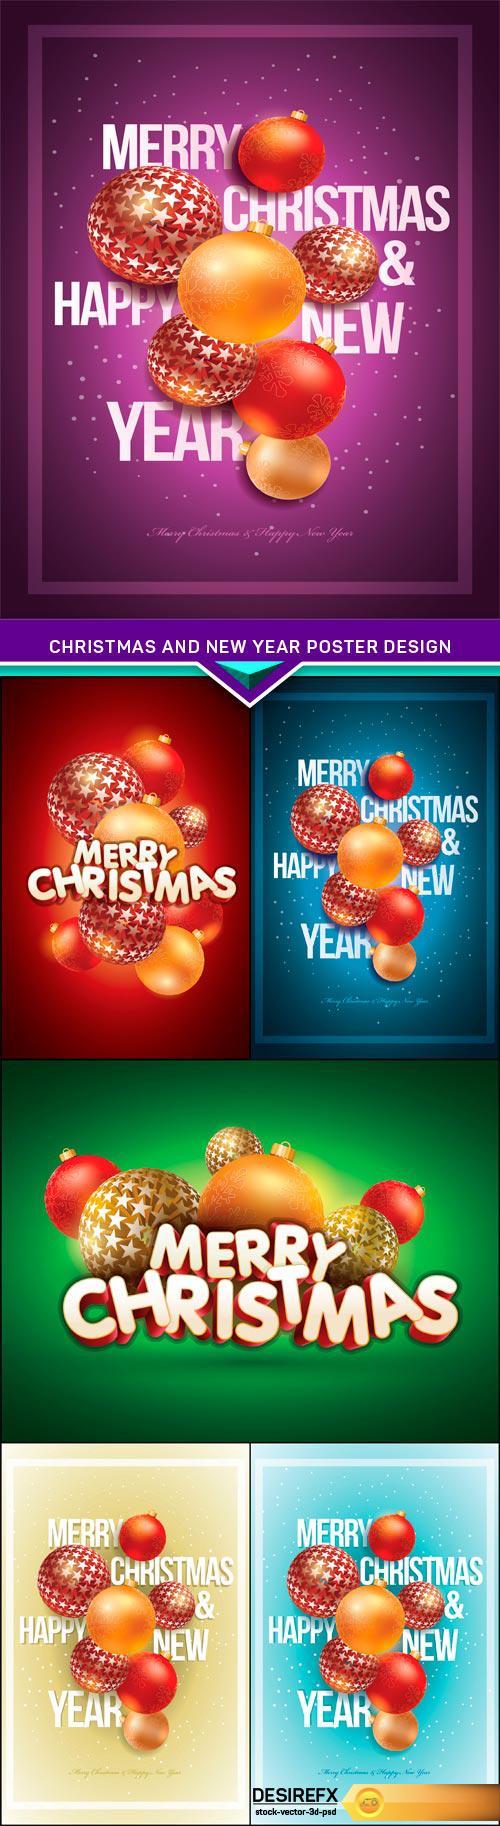 Christmas and New Year Poster Design 6X EPS